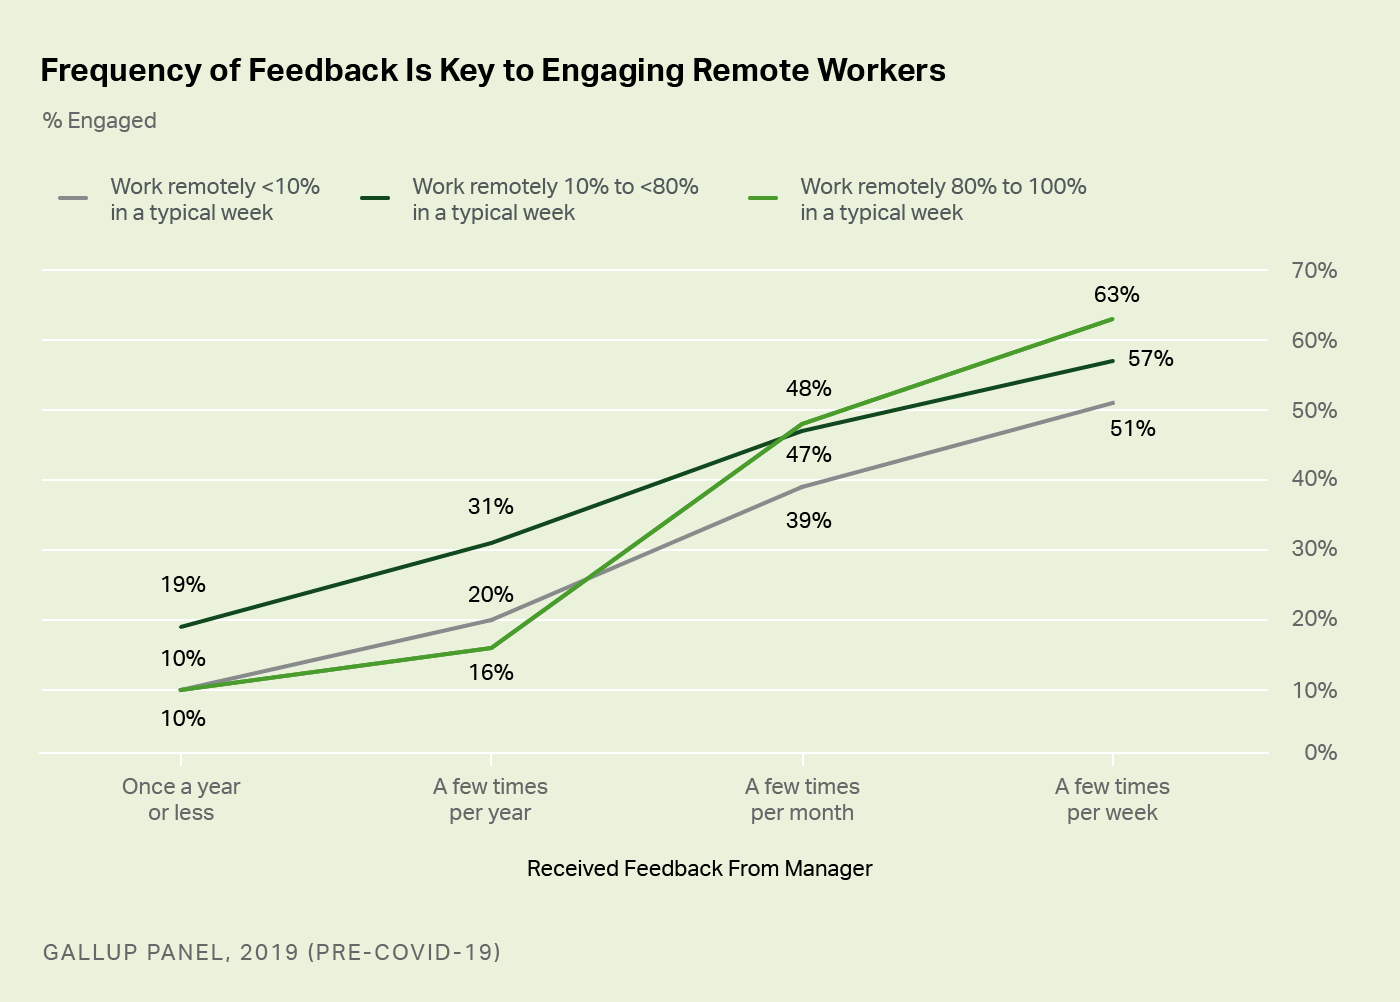 Frequency of Feedback is Key to Engaging Remote Workers